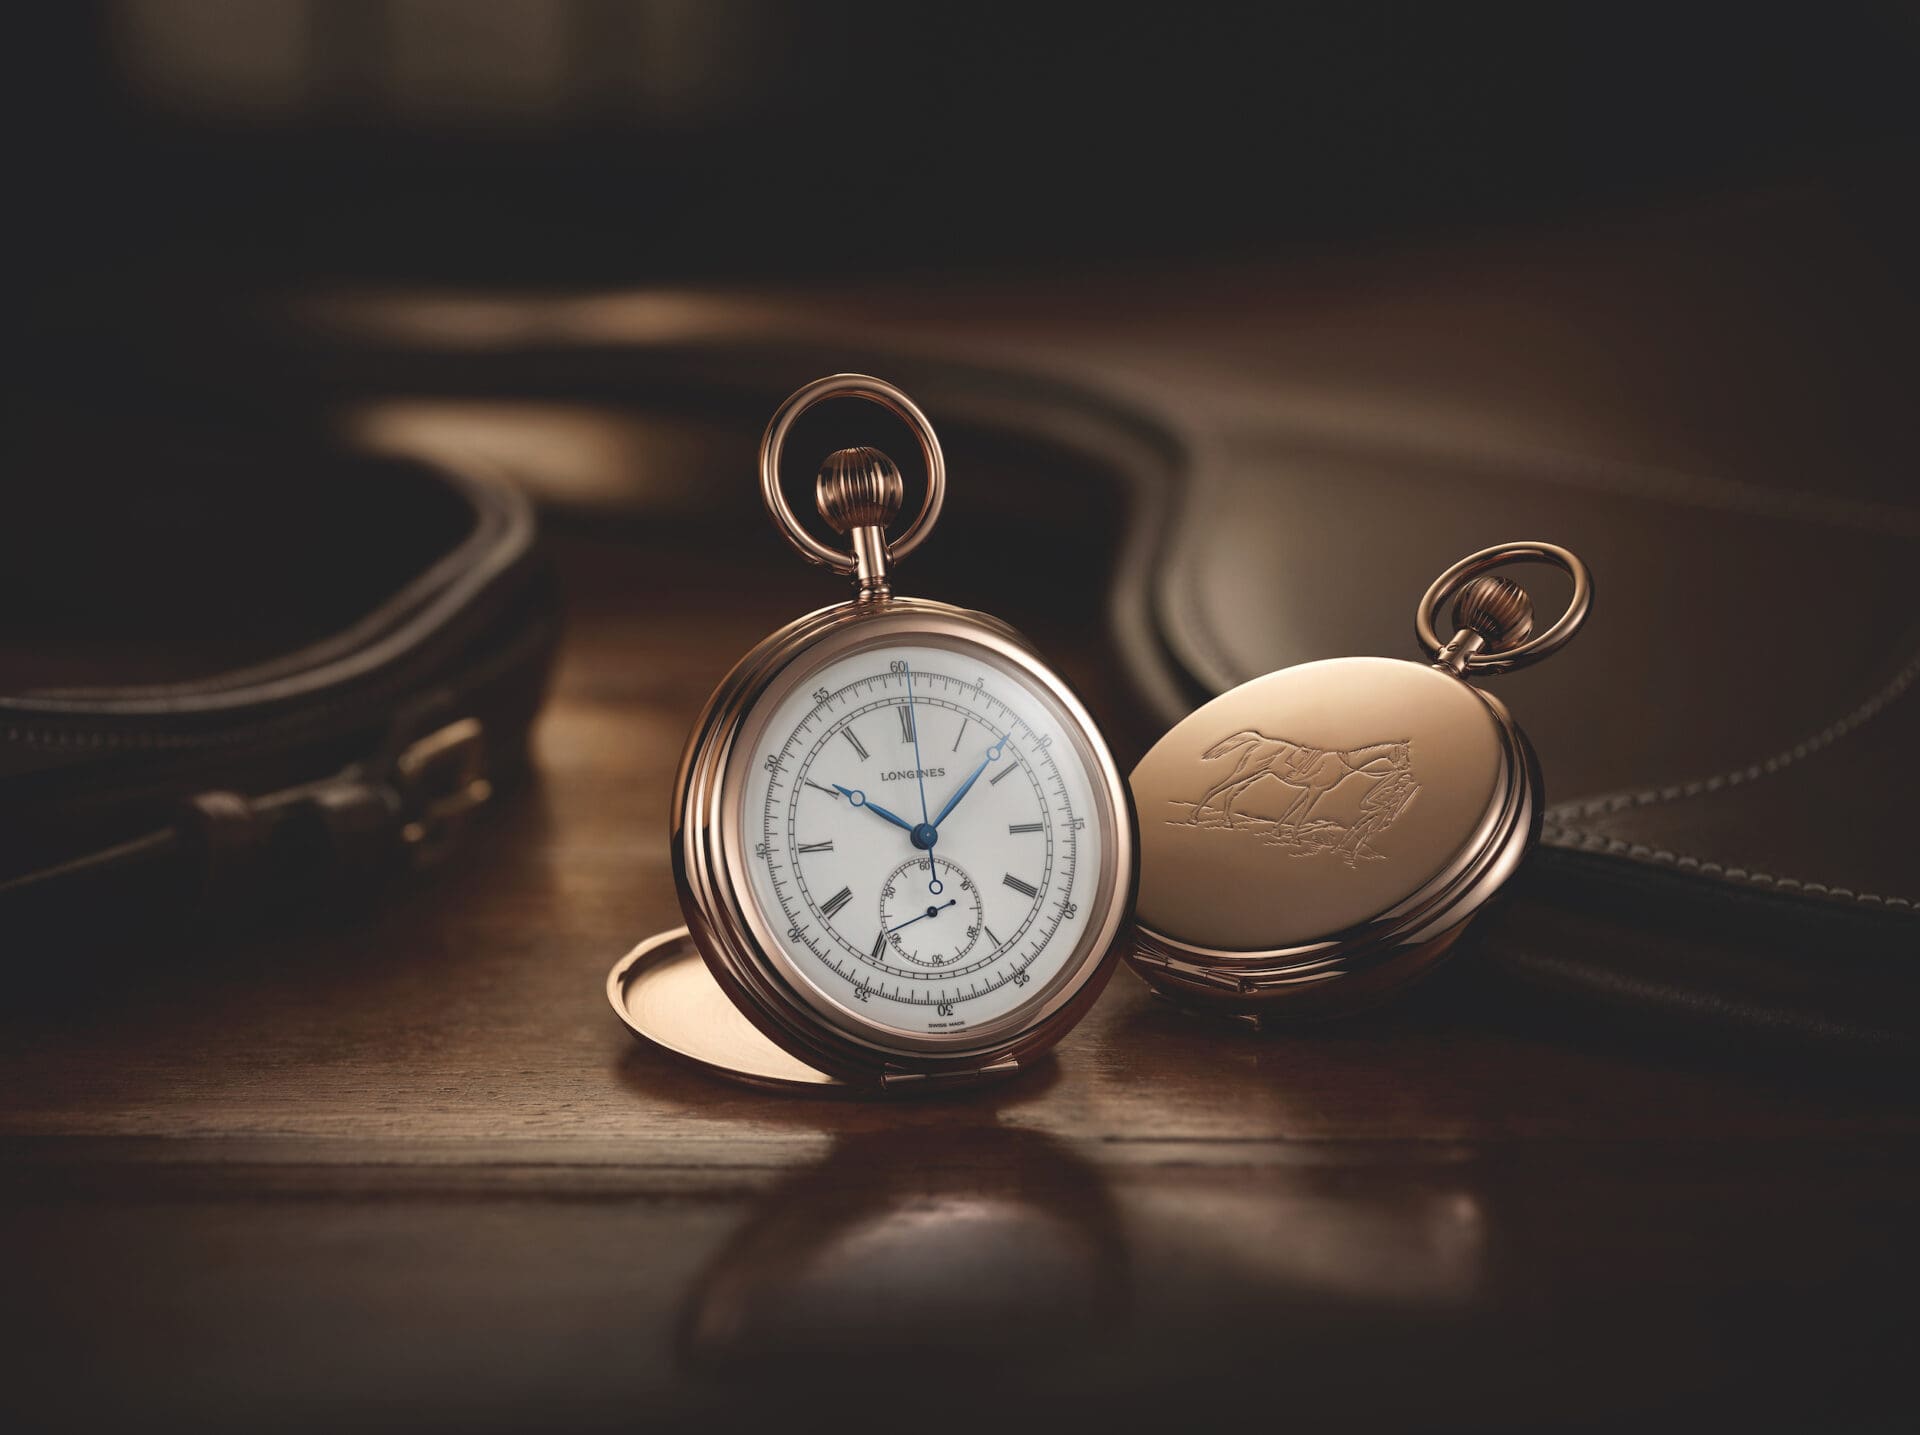 Just in time for the races: The Longines Equestrian Pocket Watch Jockey 1878